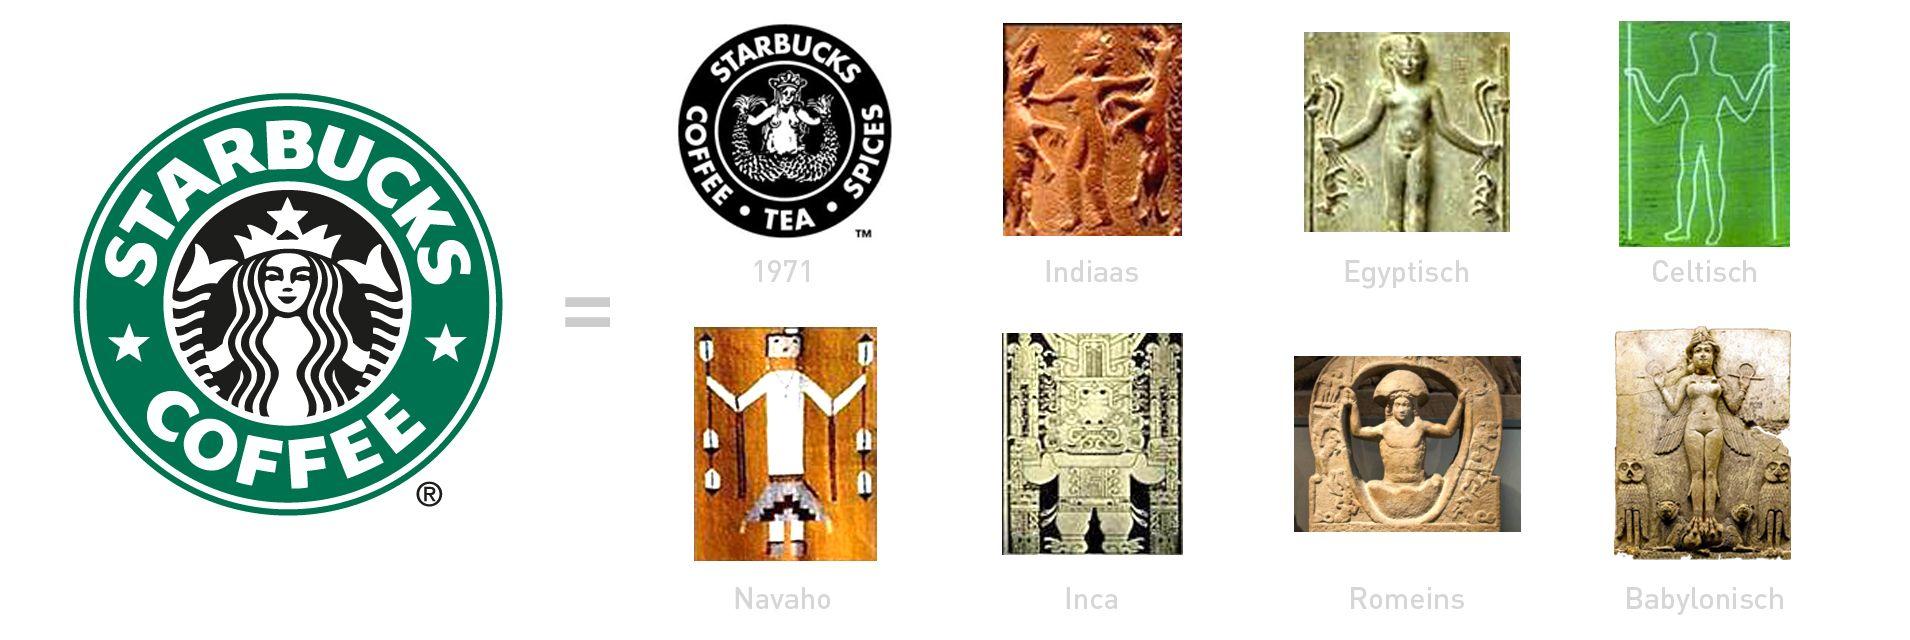 Different Starbucks Logo - The hidden meaning of Food & Drink logo designs